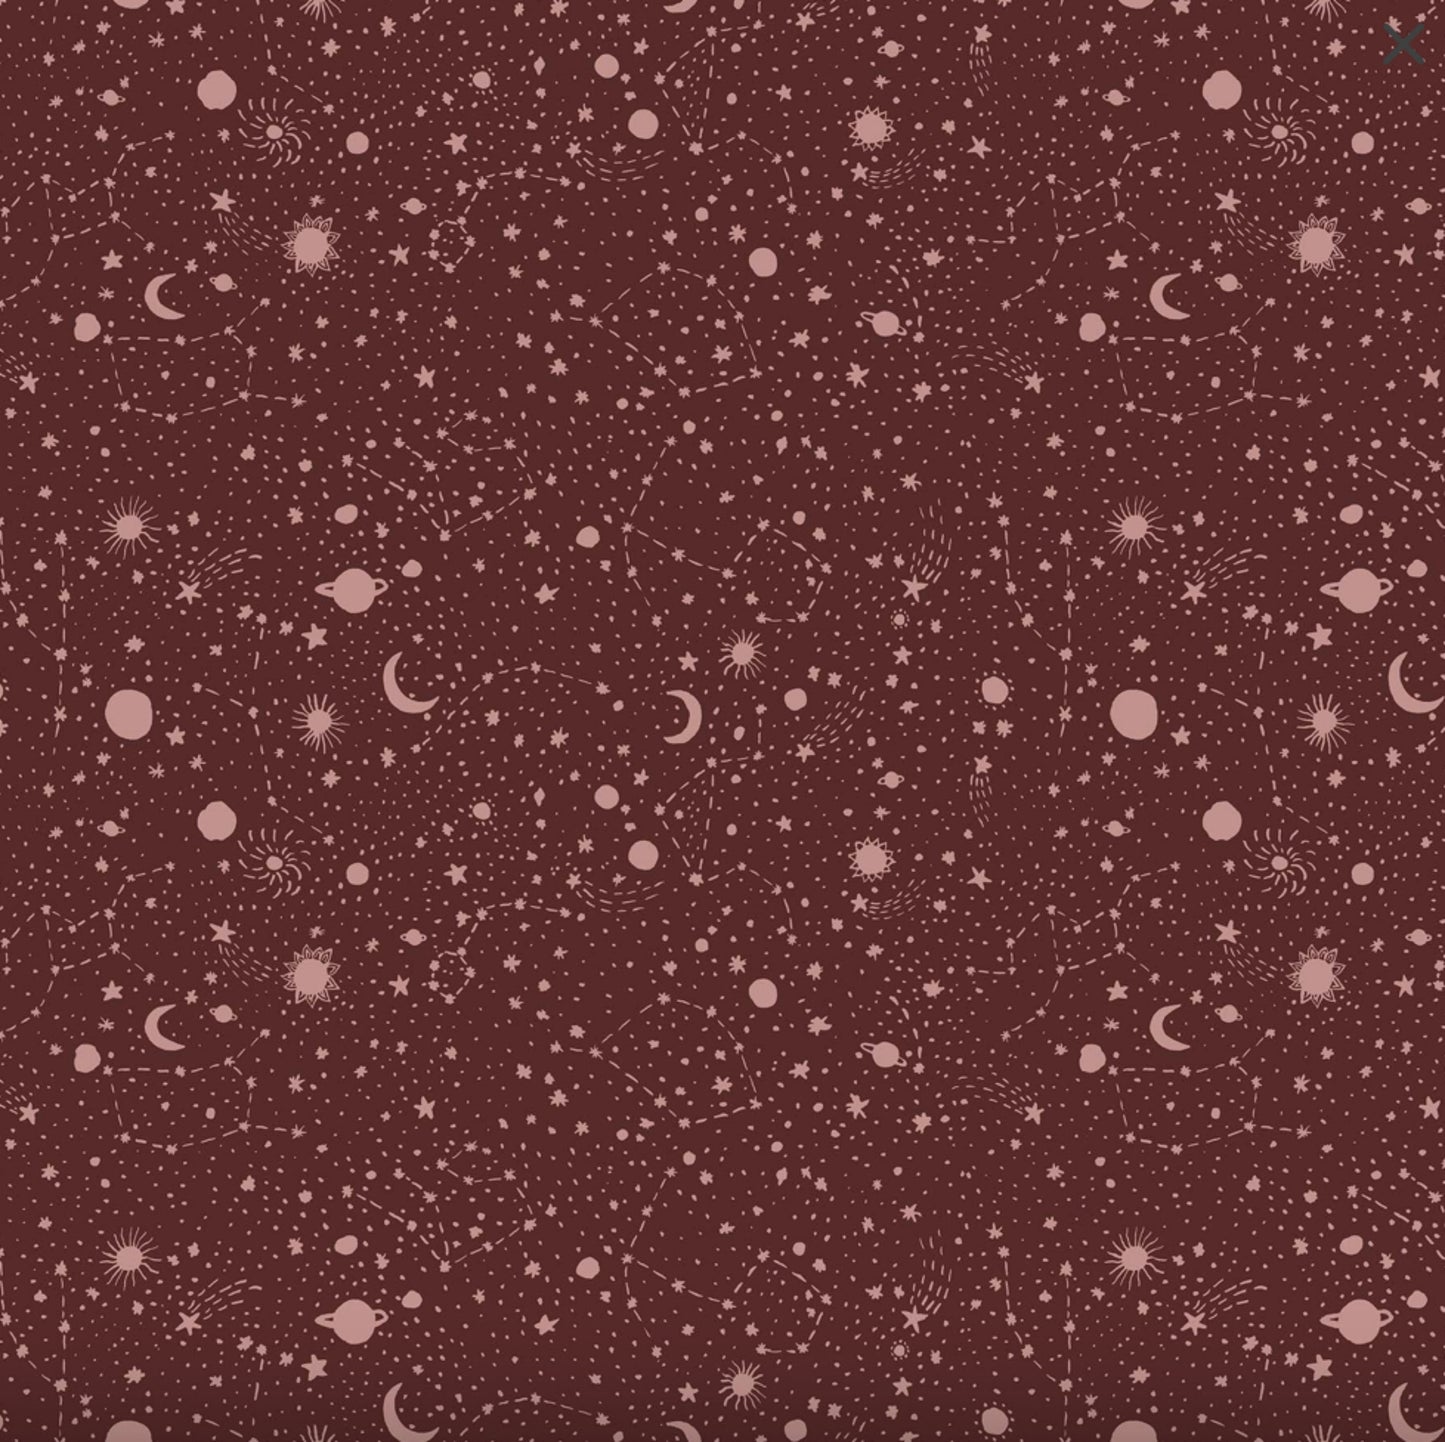 Constellations - From the Galaxies Collection from Figo Fabrics - 90578-36 - Rust